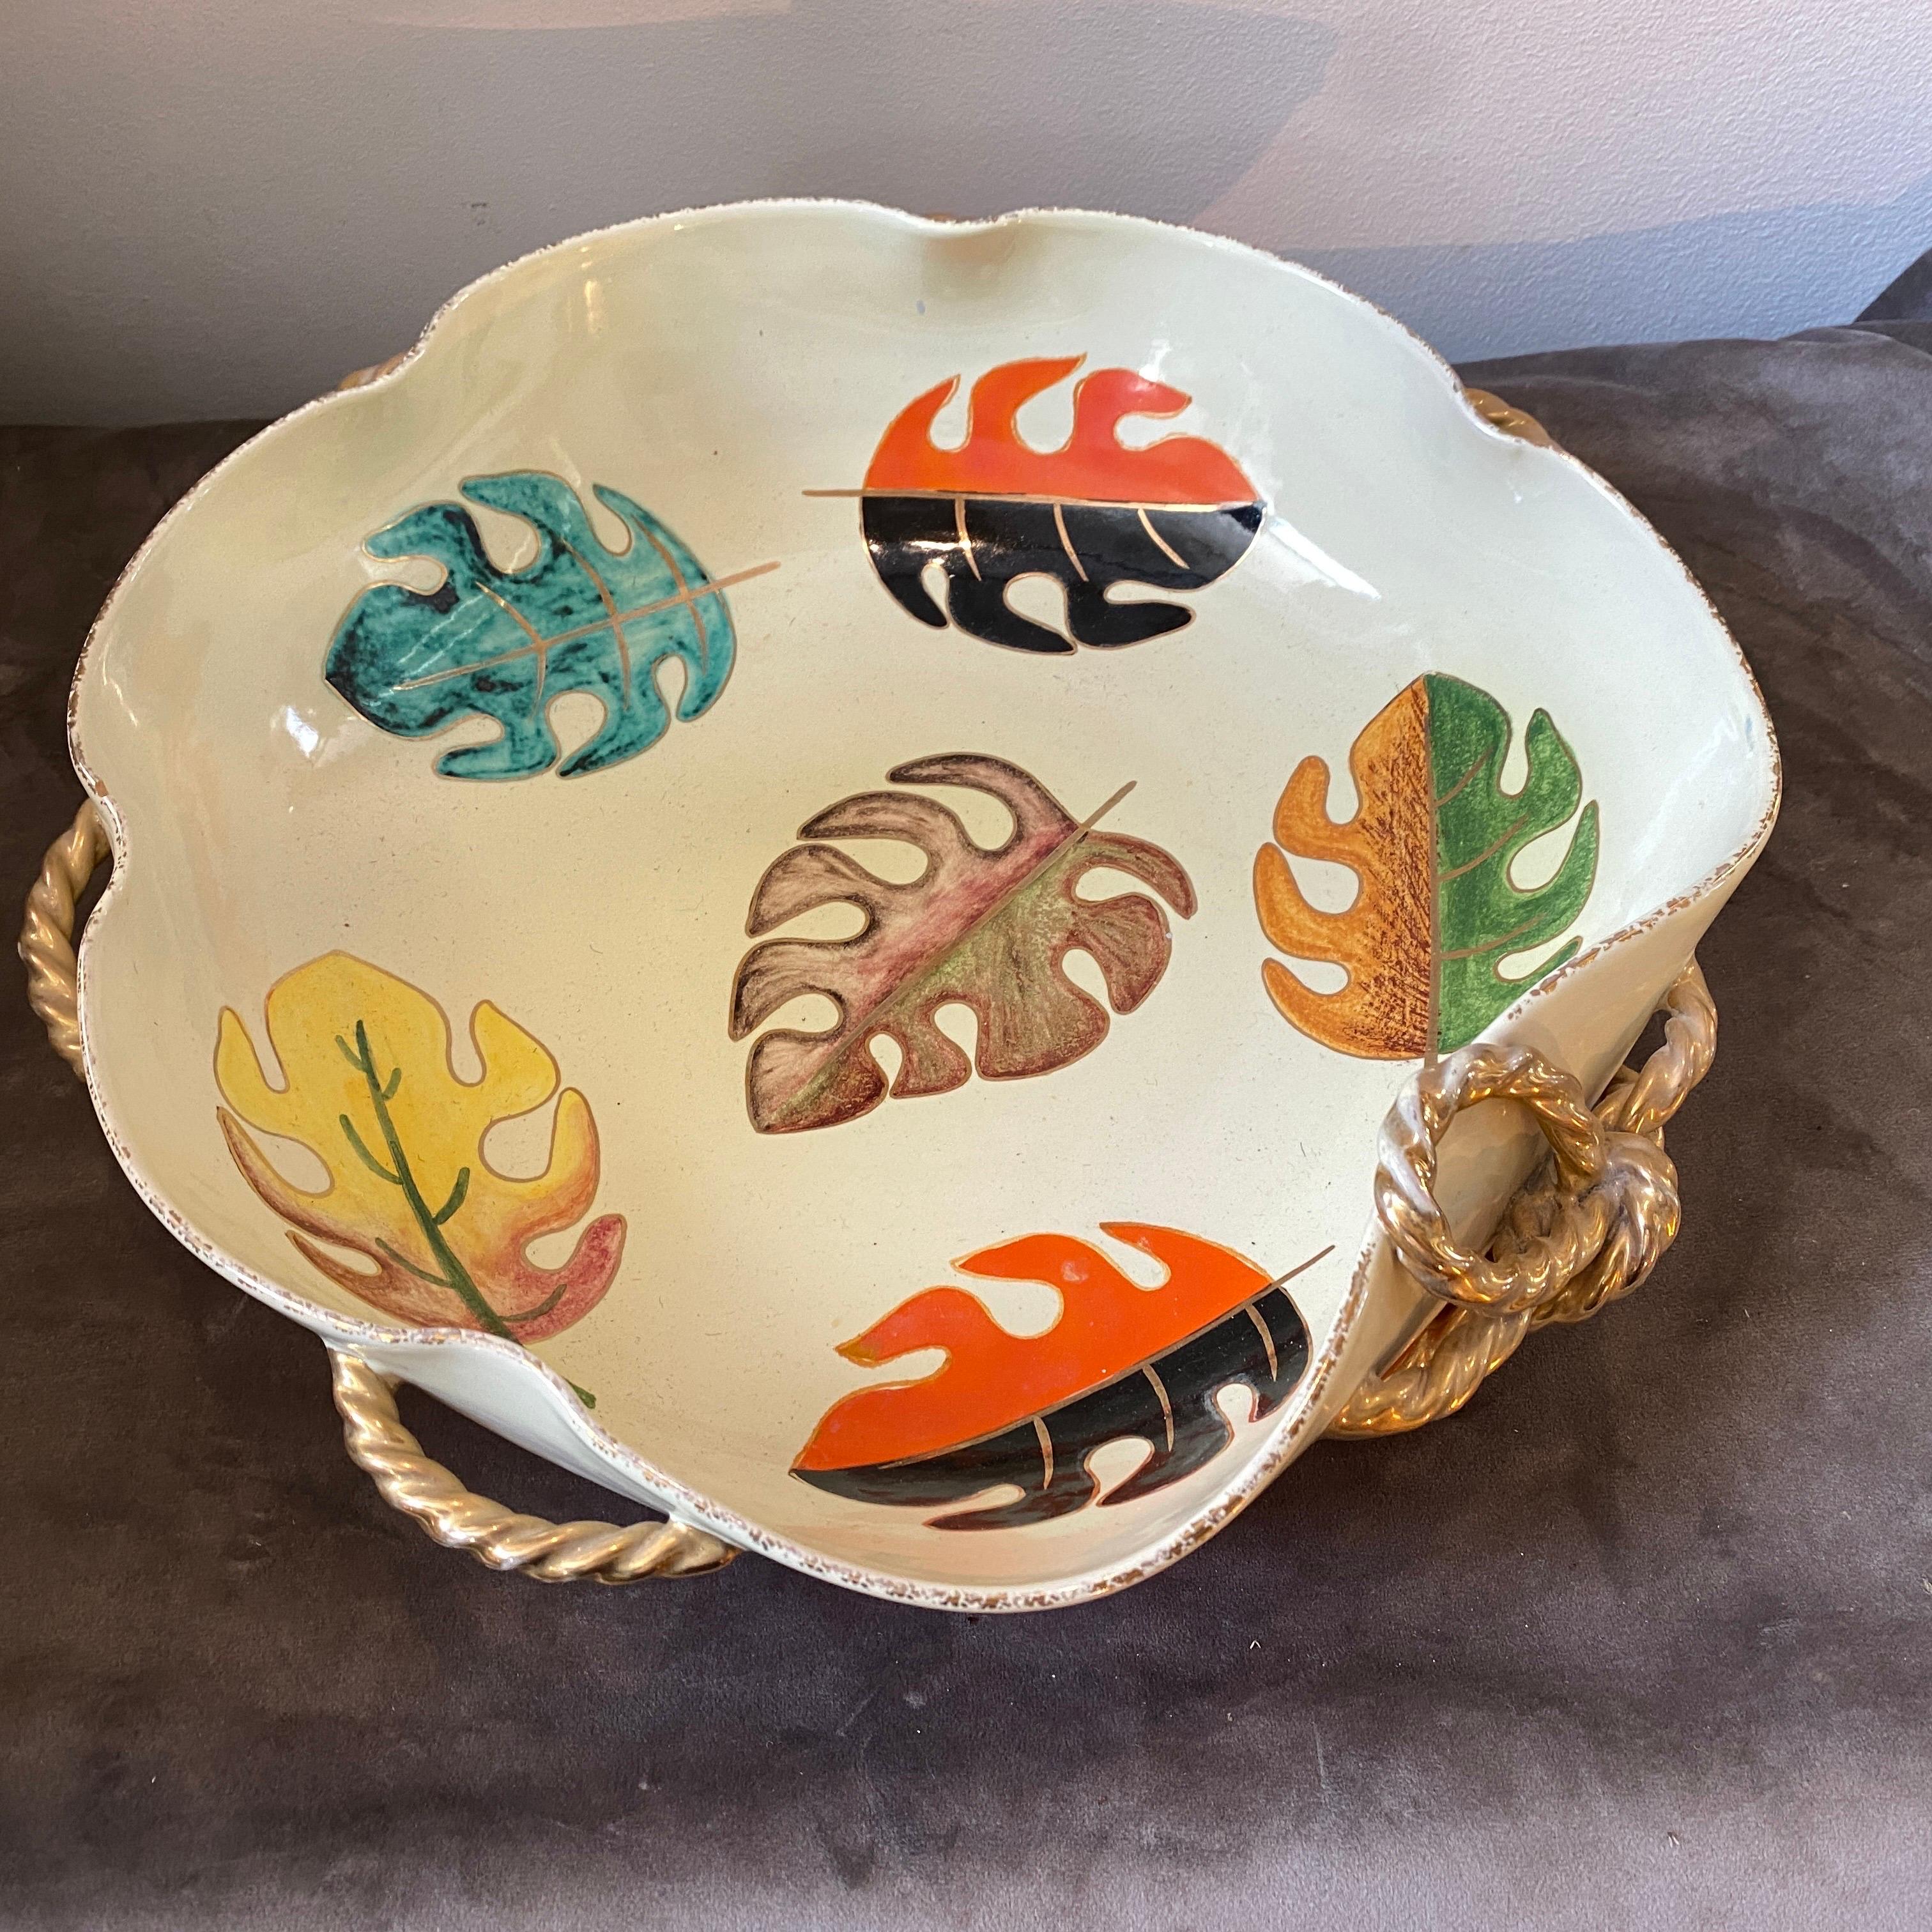 A stylish ceramic centerpiece designed and hand-crafted in Italy by world famous italian manufacturer Pucci, the colors and the shape are iconic of the producer. It's signed on the bottom. The bowl has normal signs of use and age.